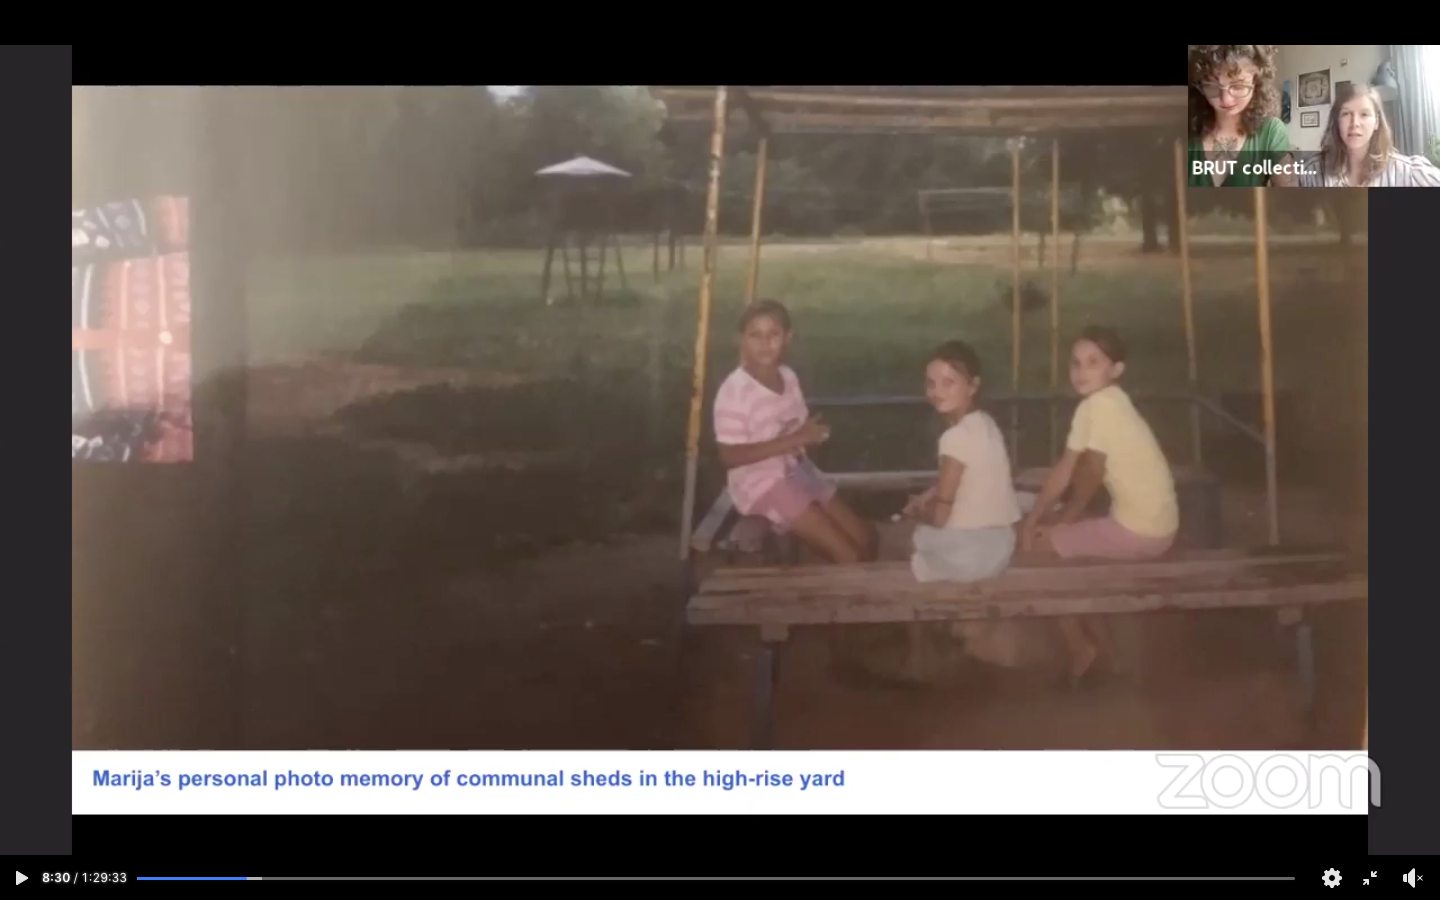 Three young girls sit in a communal shed - benches with a wooden roof - in a high-rise yard